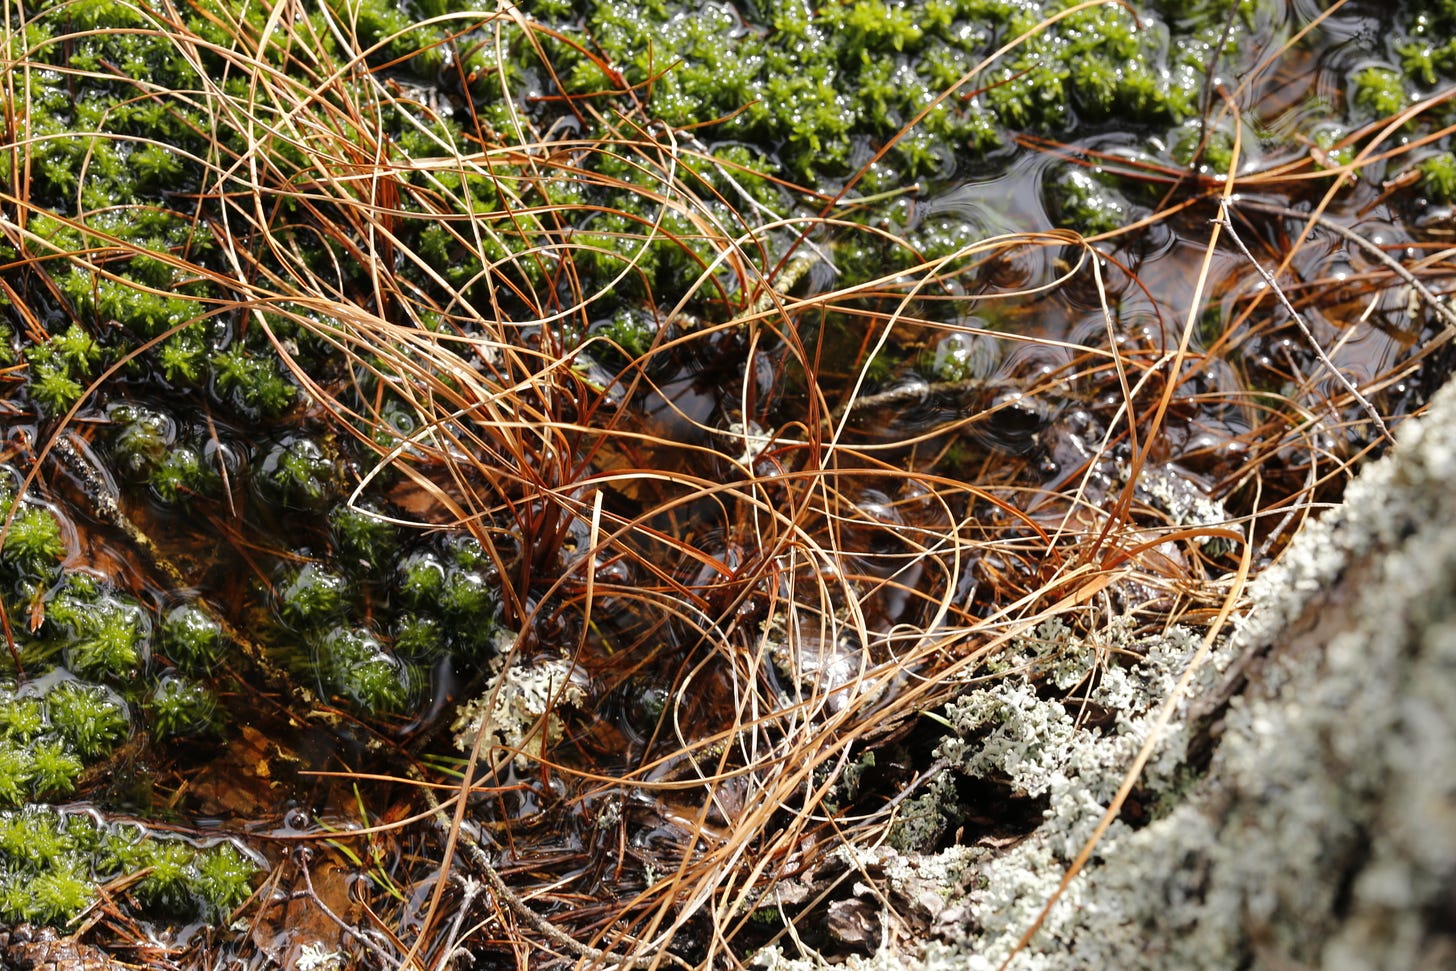 The curving orange winter leaves of Common Cottongrass (Eriophorum angustifolium) contrast with bright green sphagnum moss (Sphagnum fallax) in a wet flush at the foot of a Scots pine tree (Pinus sylvestris).